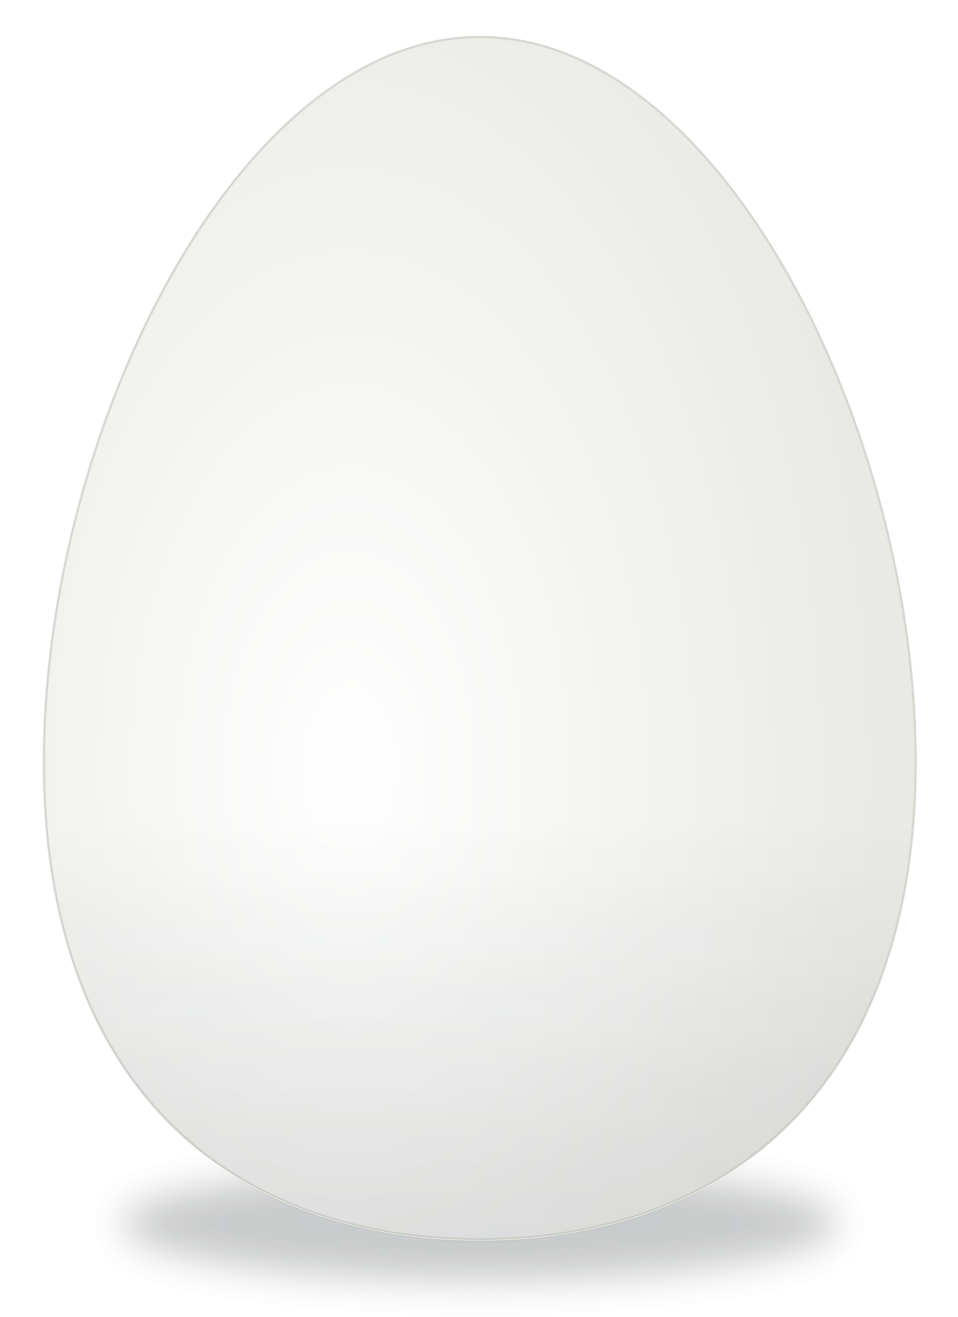 Pngegg PNG Pic Background